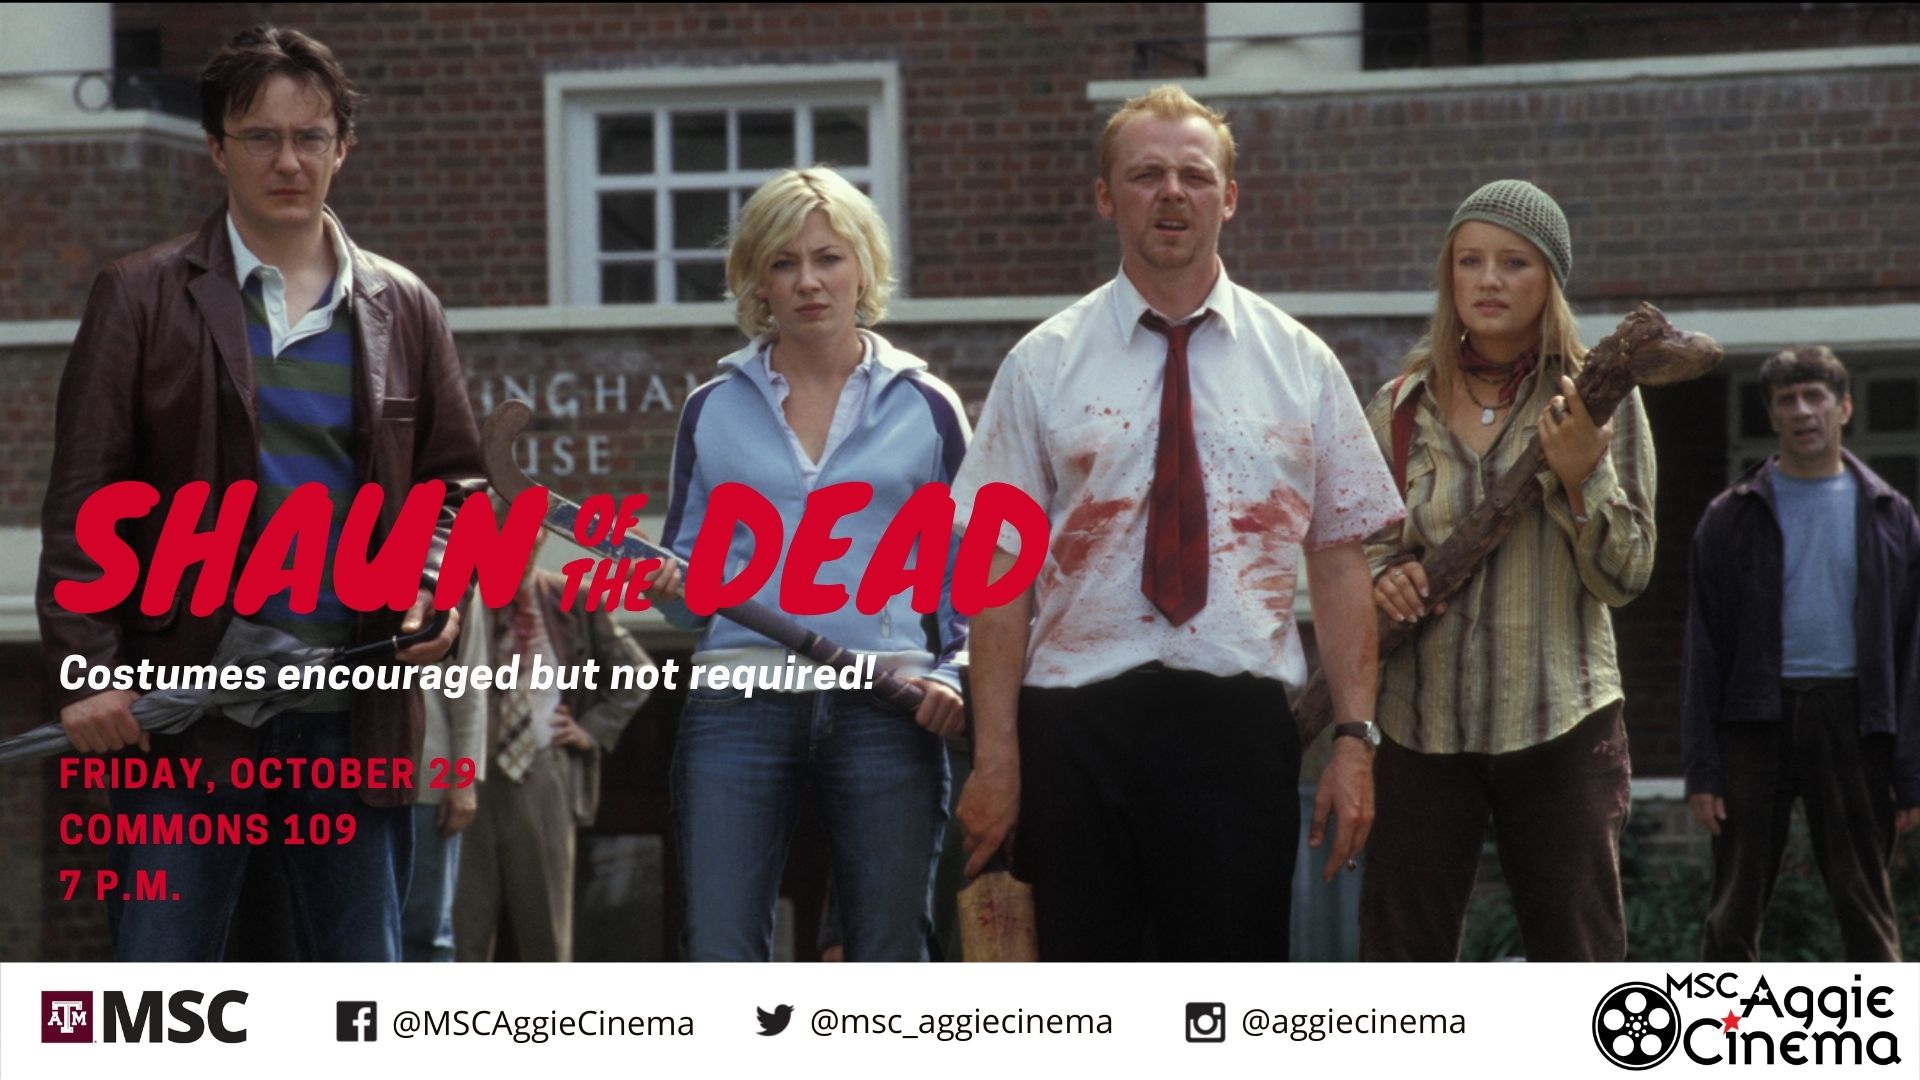 Shaun of the Dead screening on October 29 in Commons 109 at 7 p.m. Free Admission